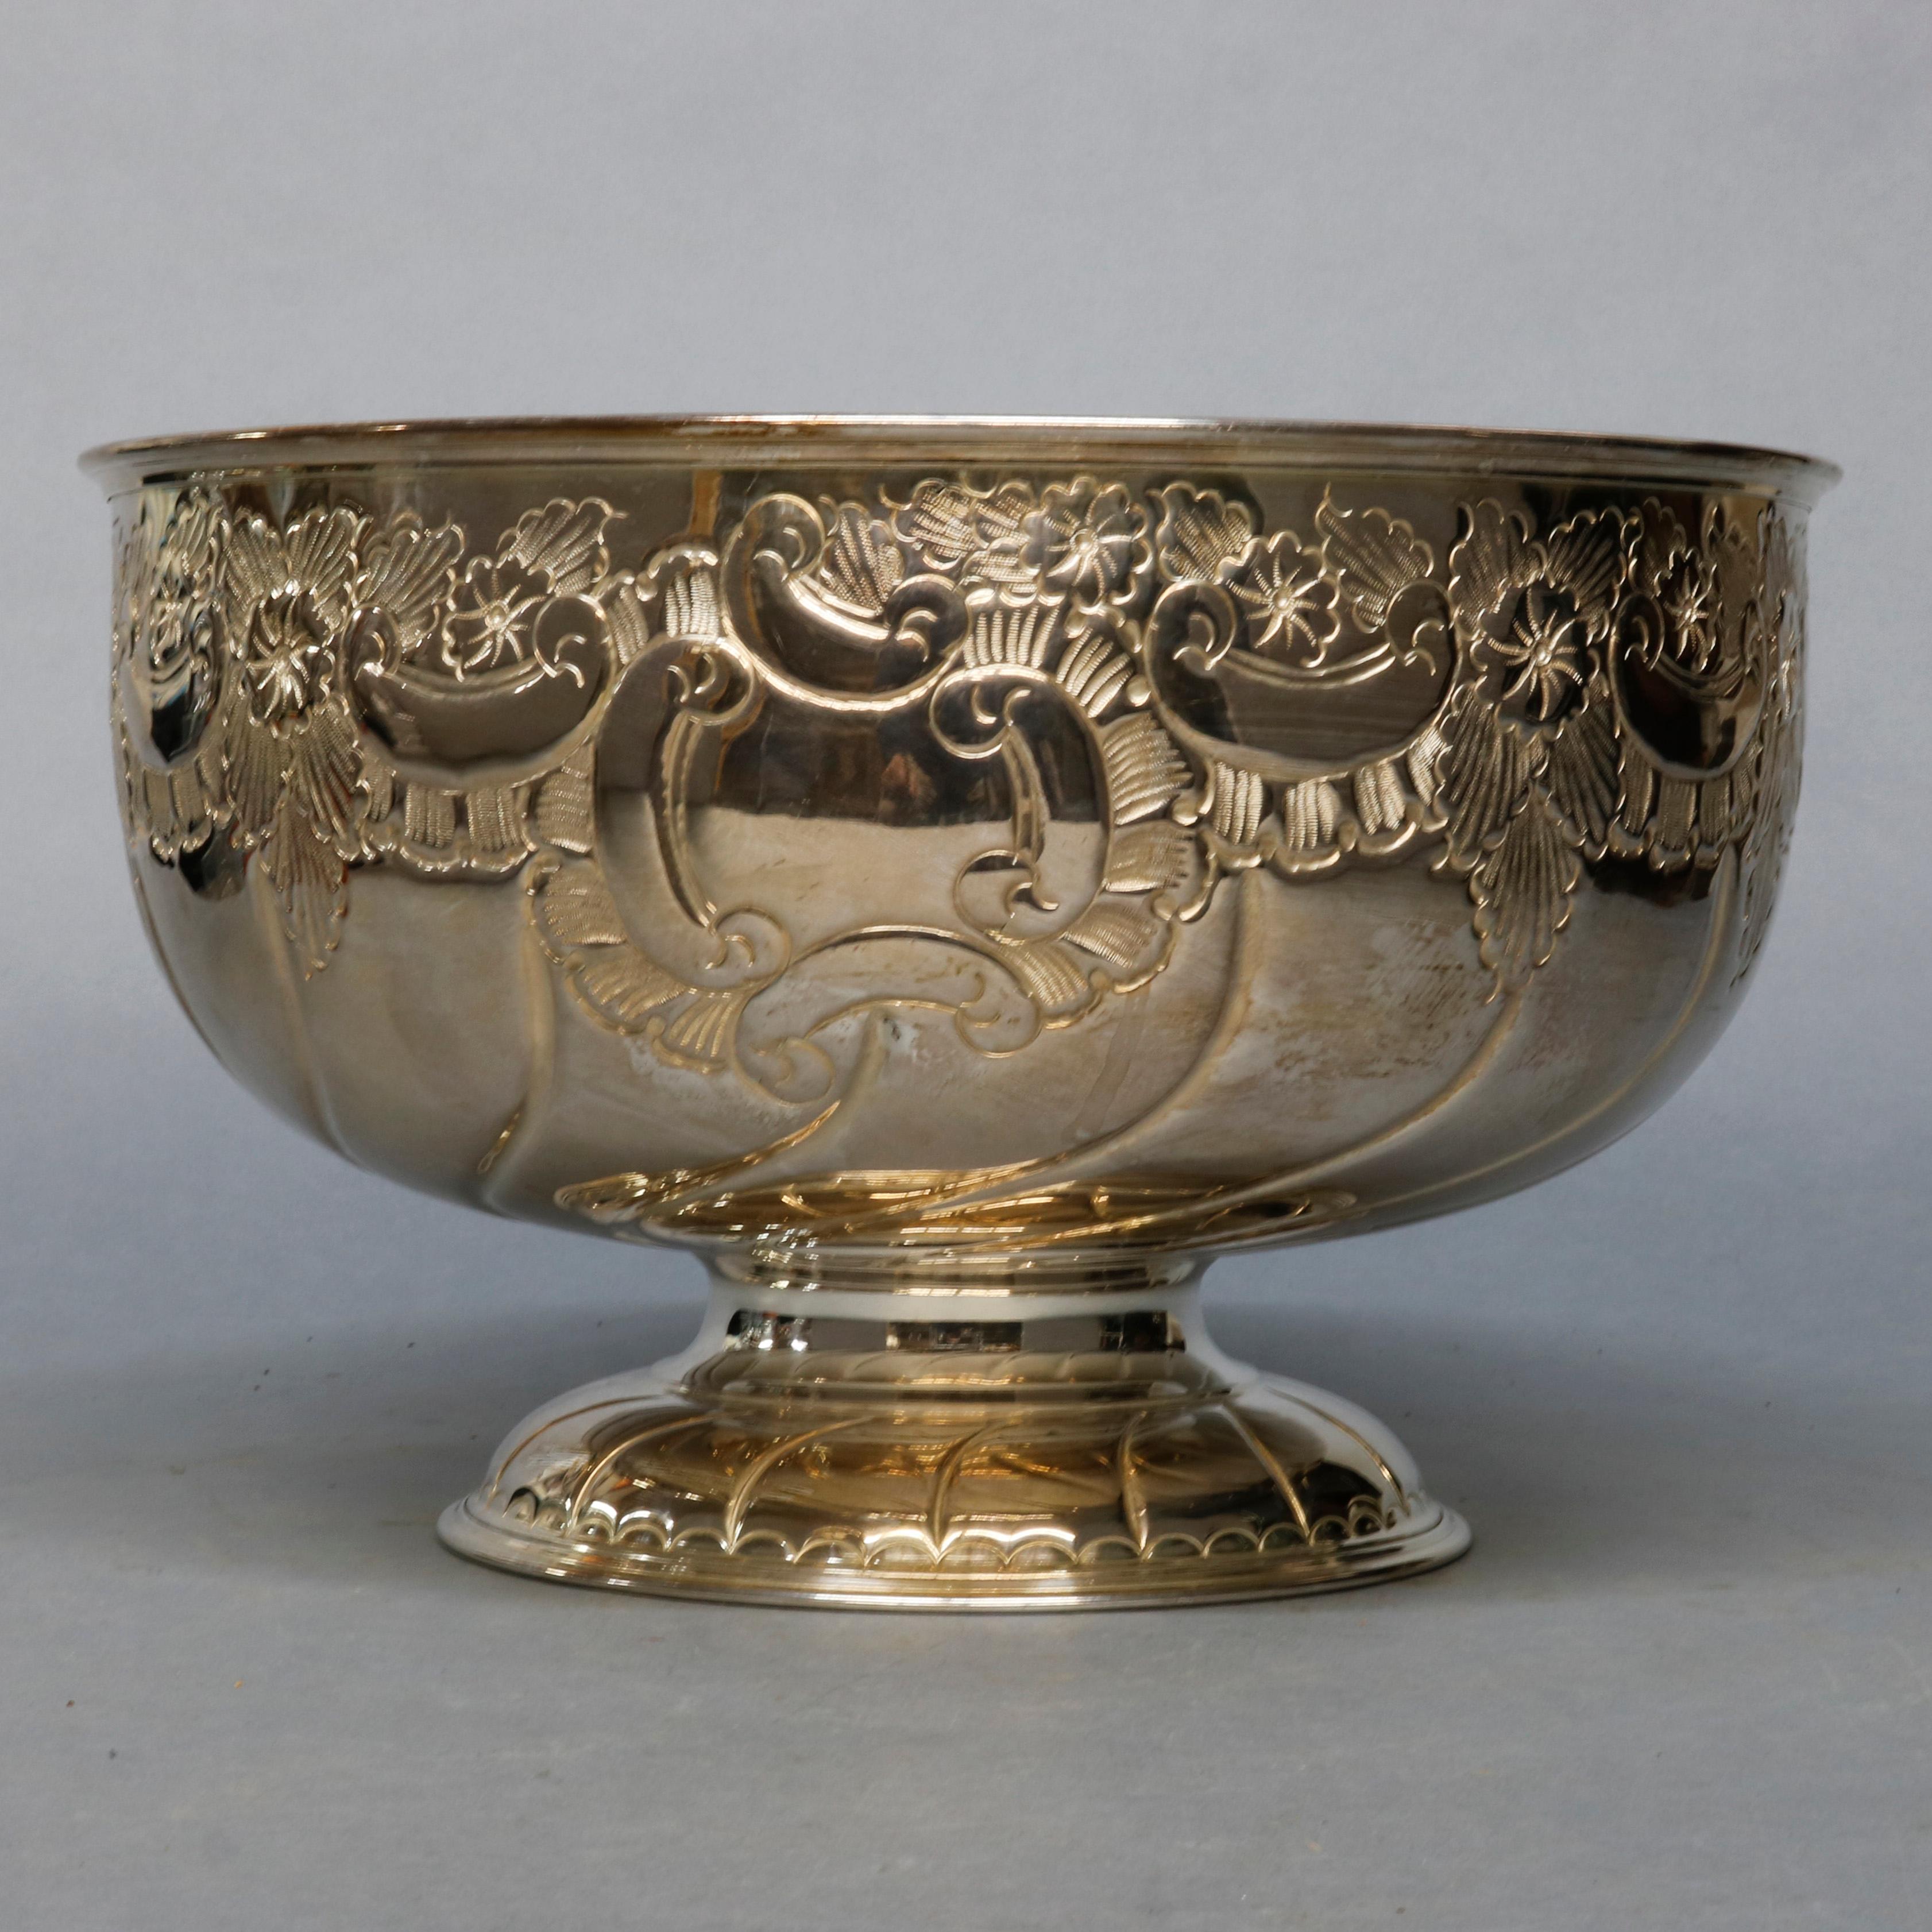 A vintage English Sheffield punch bowl offers silver plate construction with melon twist bowl having floral repousse collar and raised on flared foot, maker mark on base as photographed, circa 1930.

Measures: 9